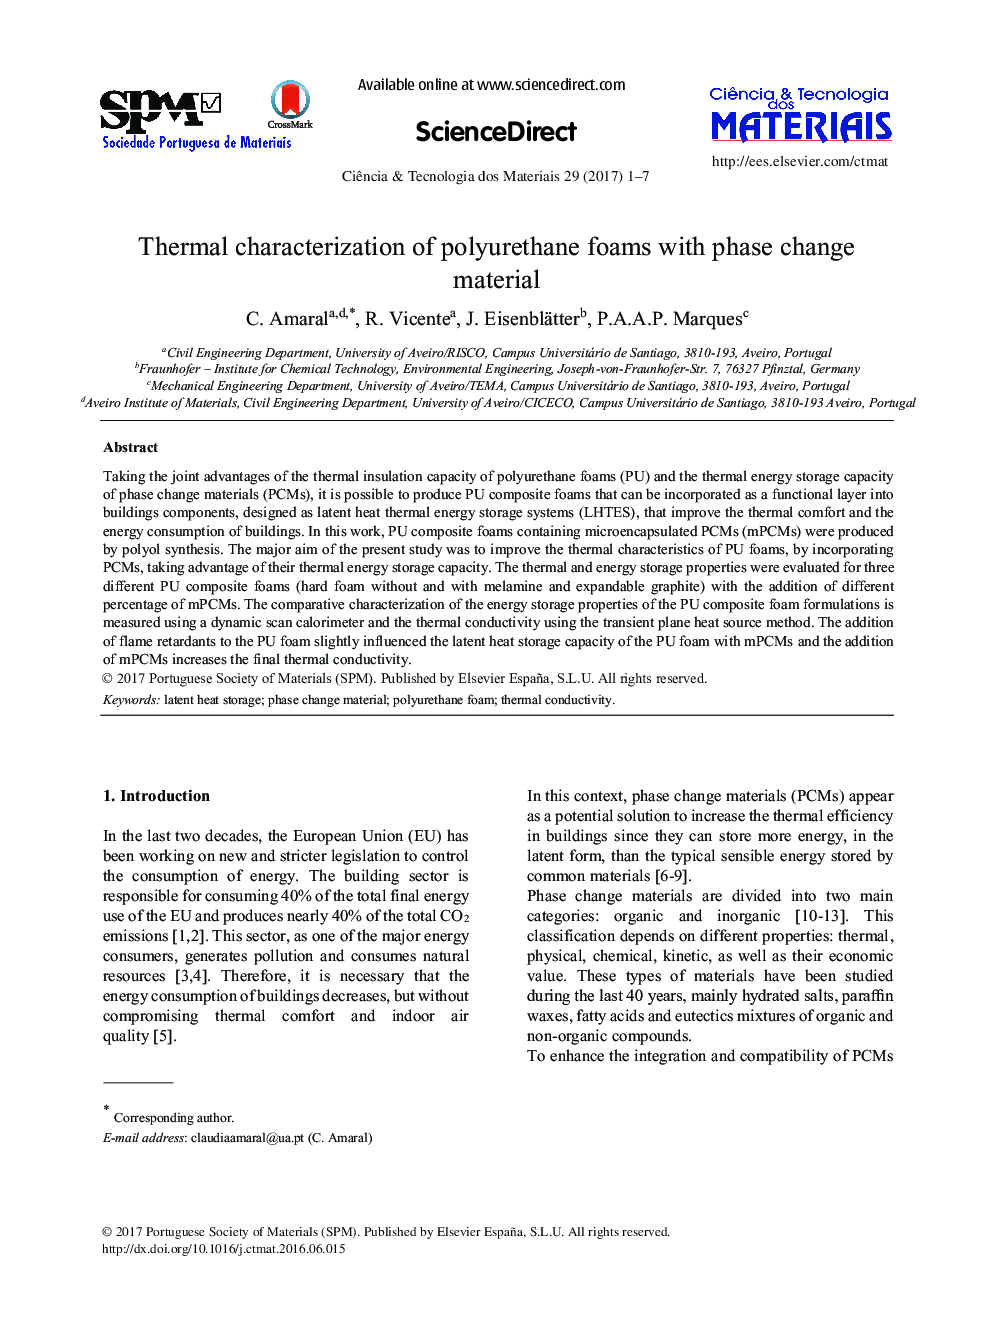 Thermal characterization of polyurethane foams with phase change material